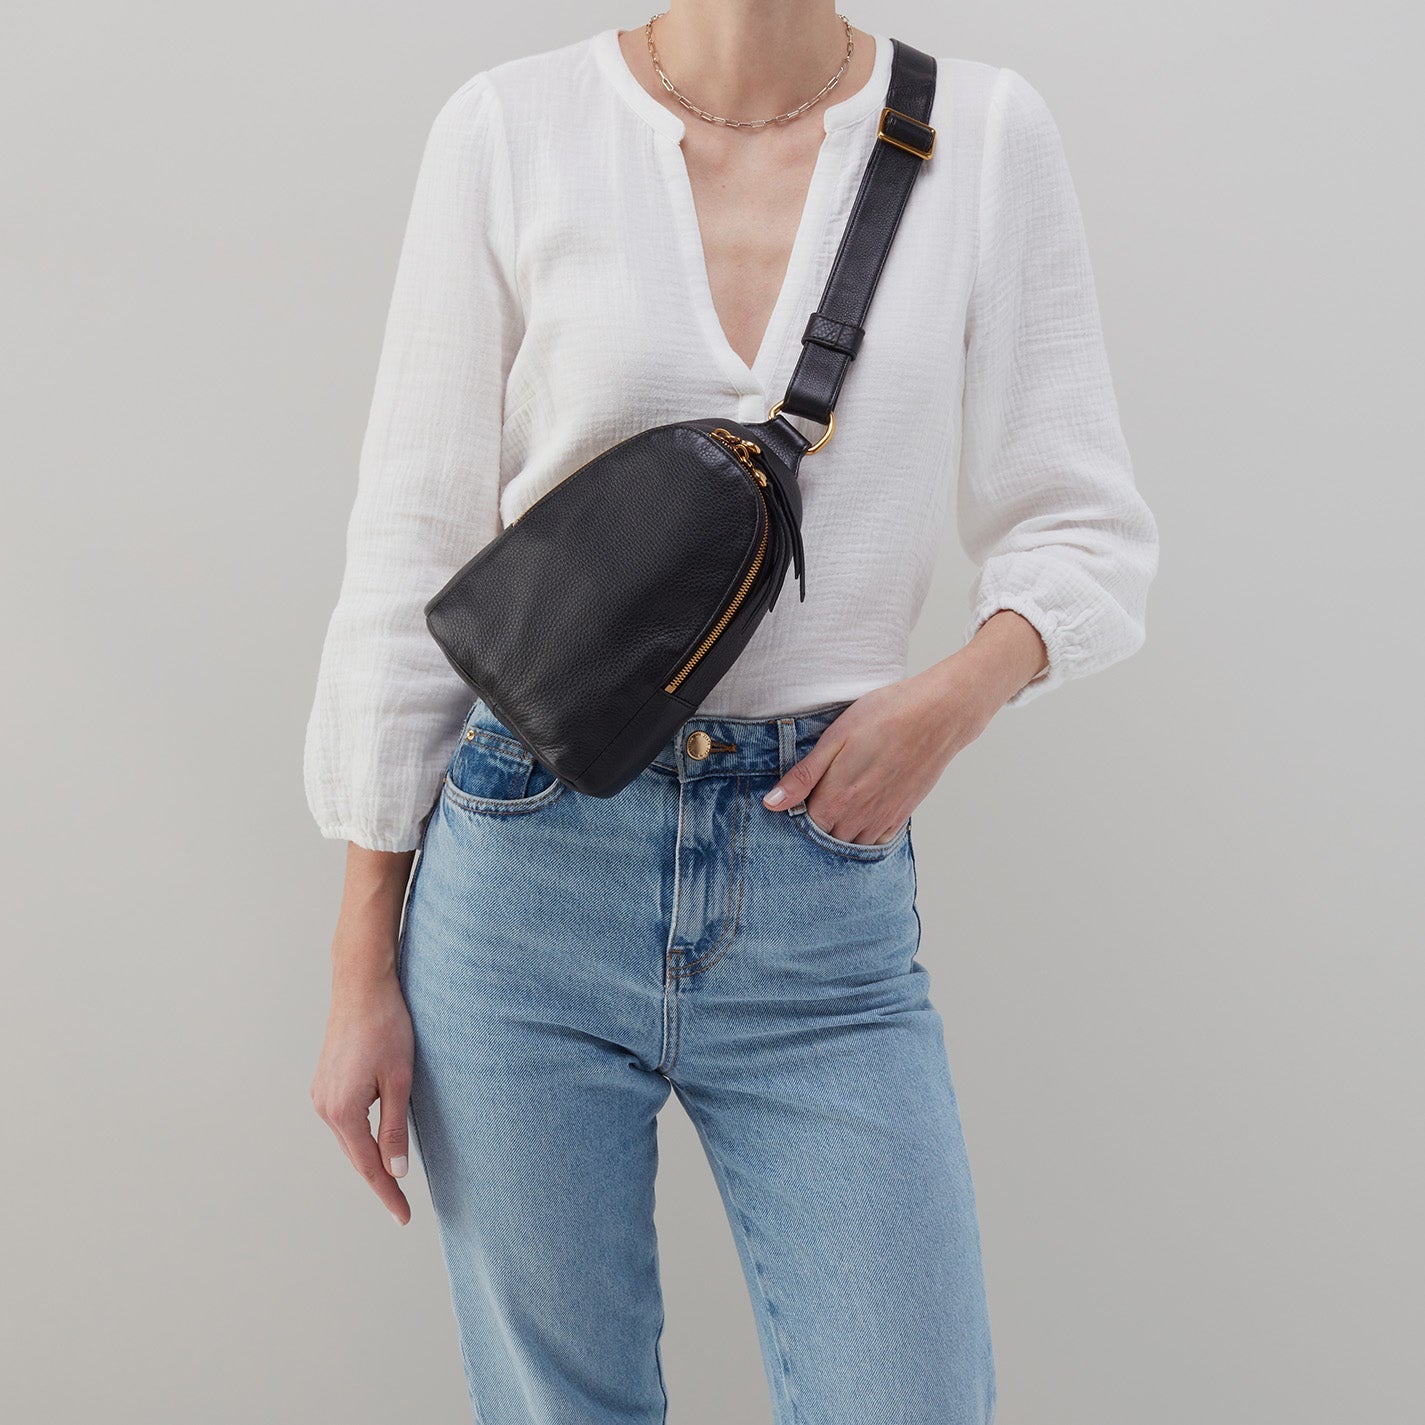 person wearing jeans and a white blouse with black fern sling across their chest.